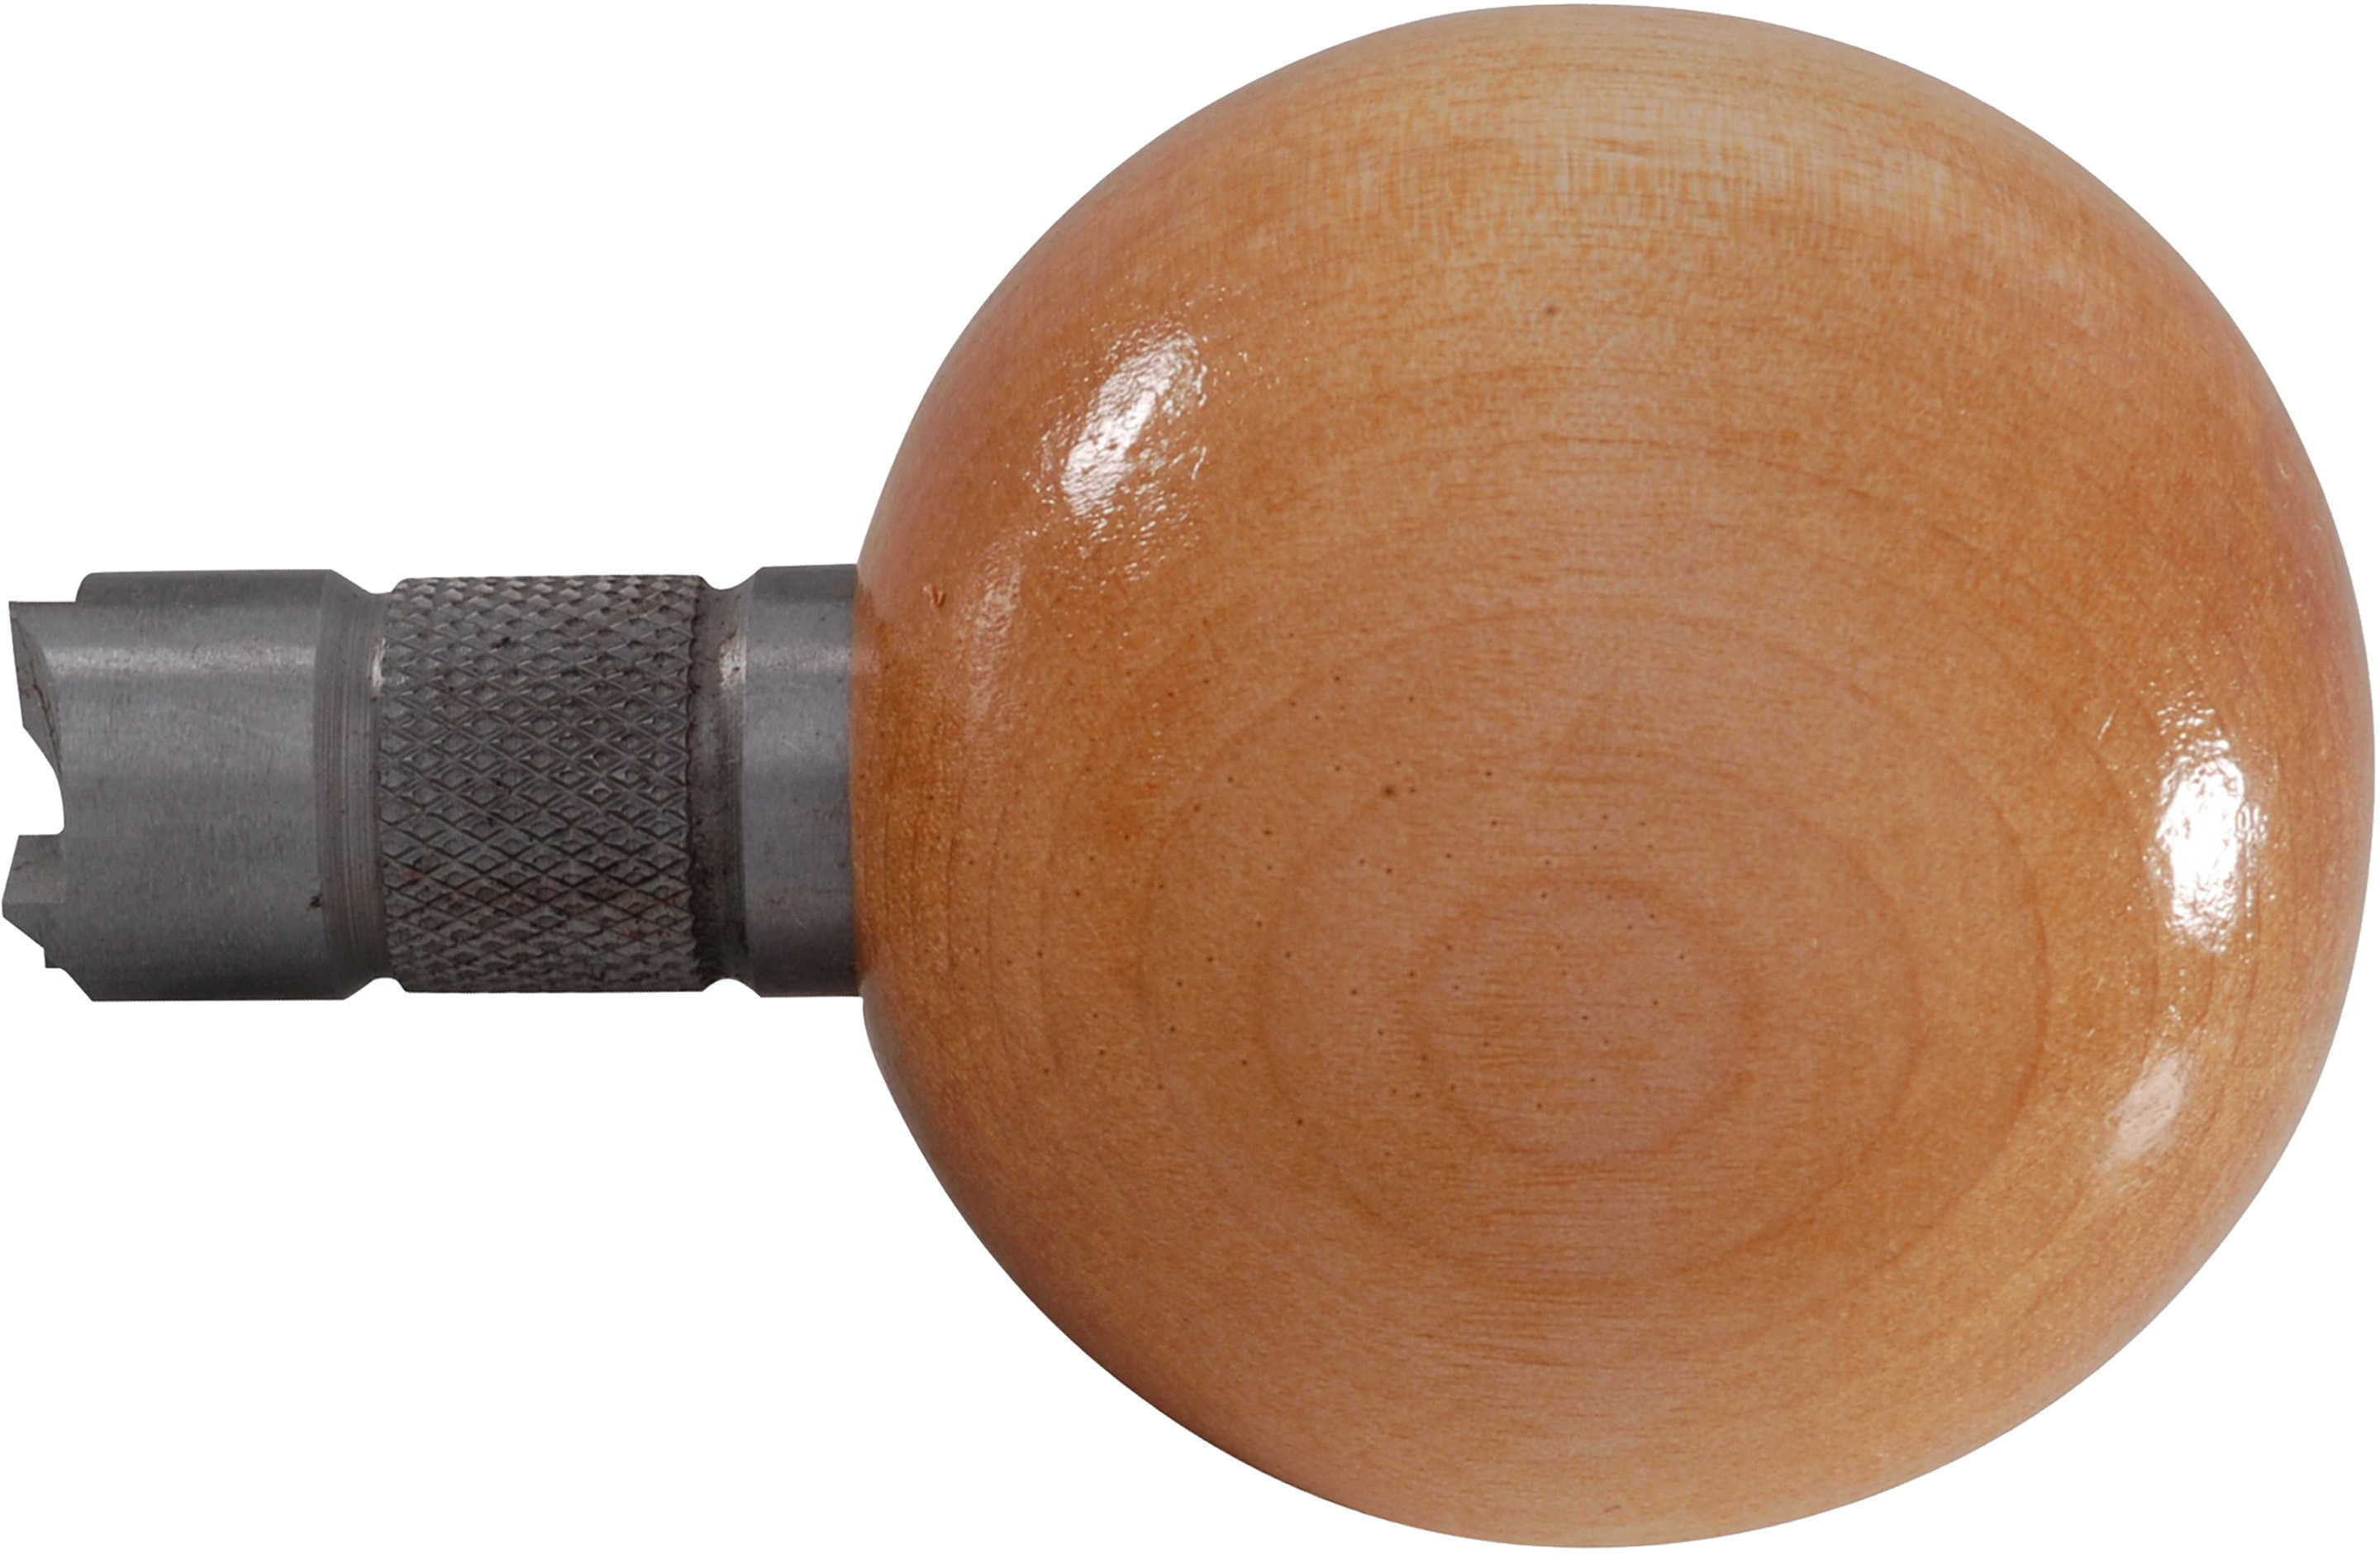 Lee Reloading Cutter With Ball Grip